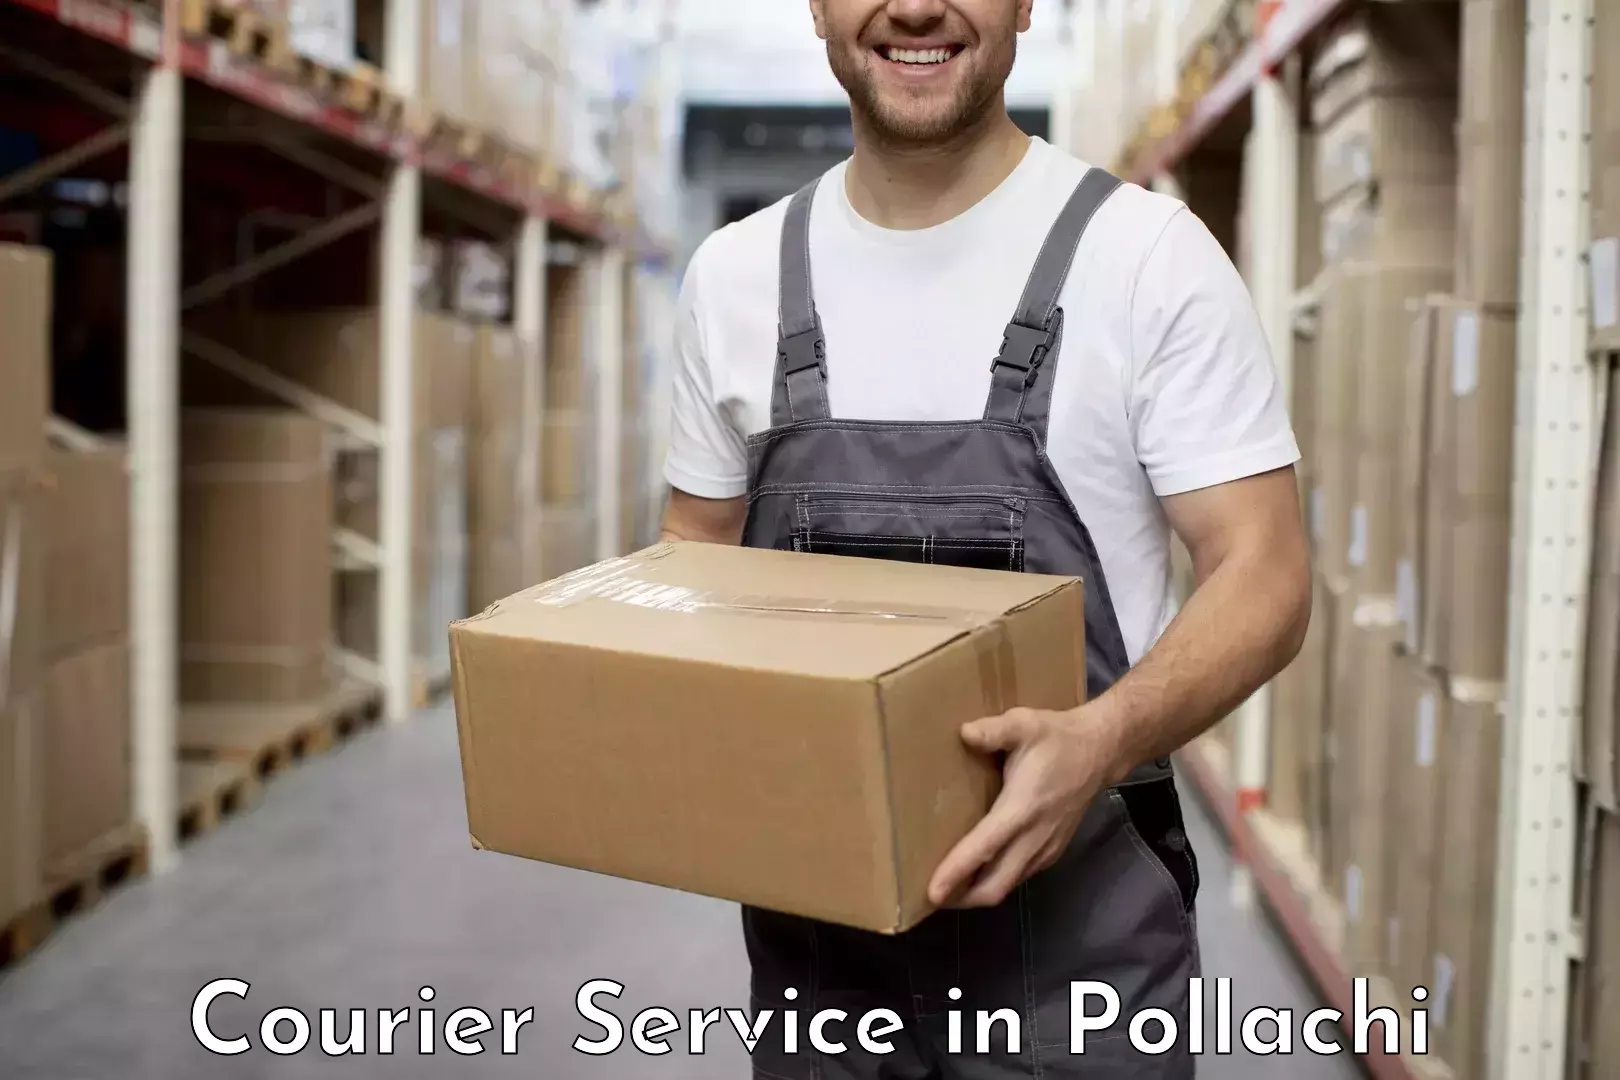 Modern delivery methods in Pollachi